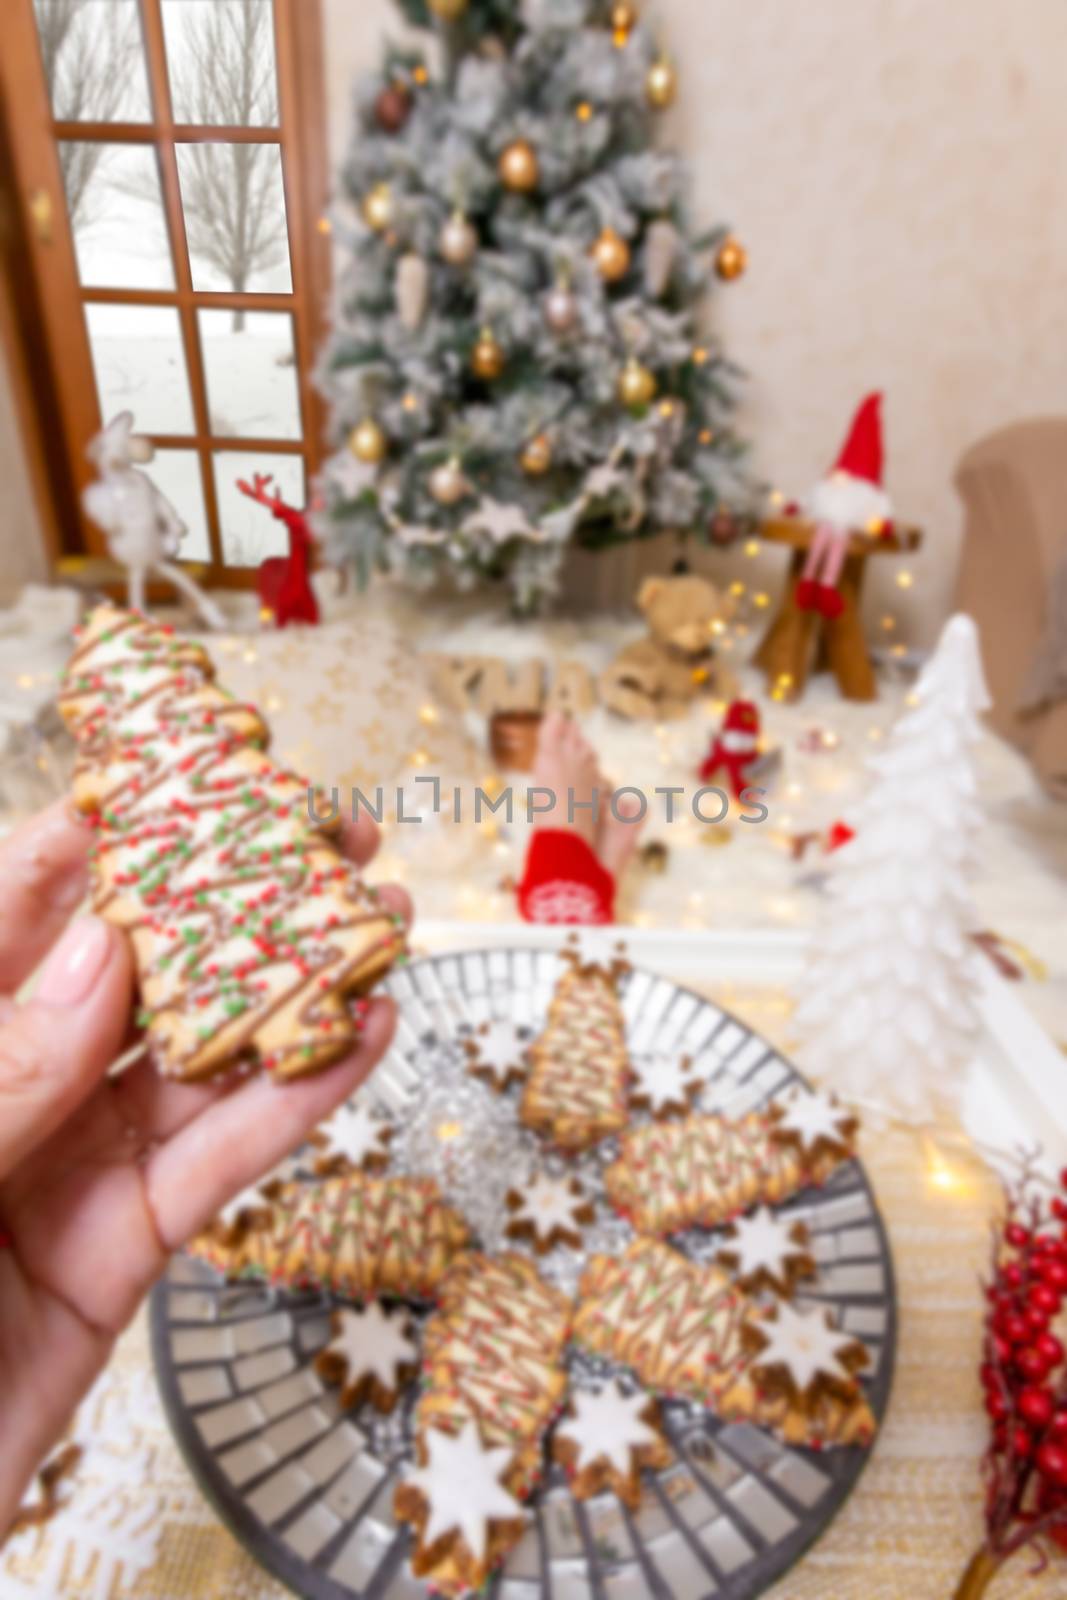 Decorated and iced Christmas tree biscuits or cookies with gingerbread stars in a festive home setting.